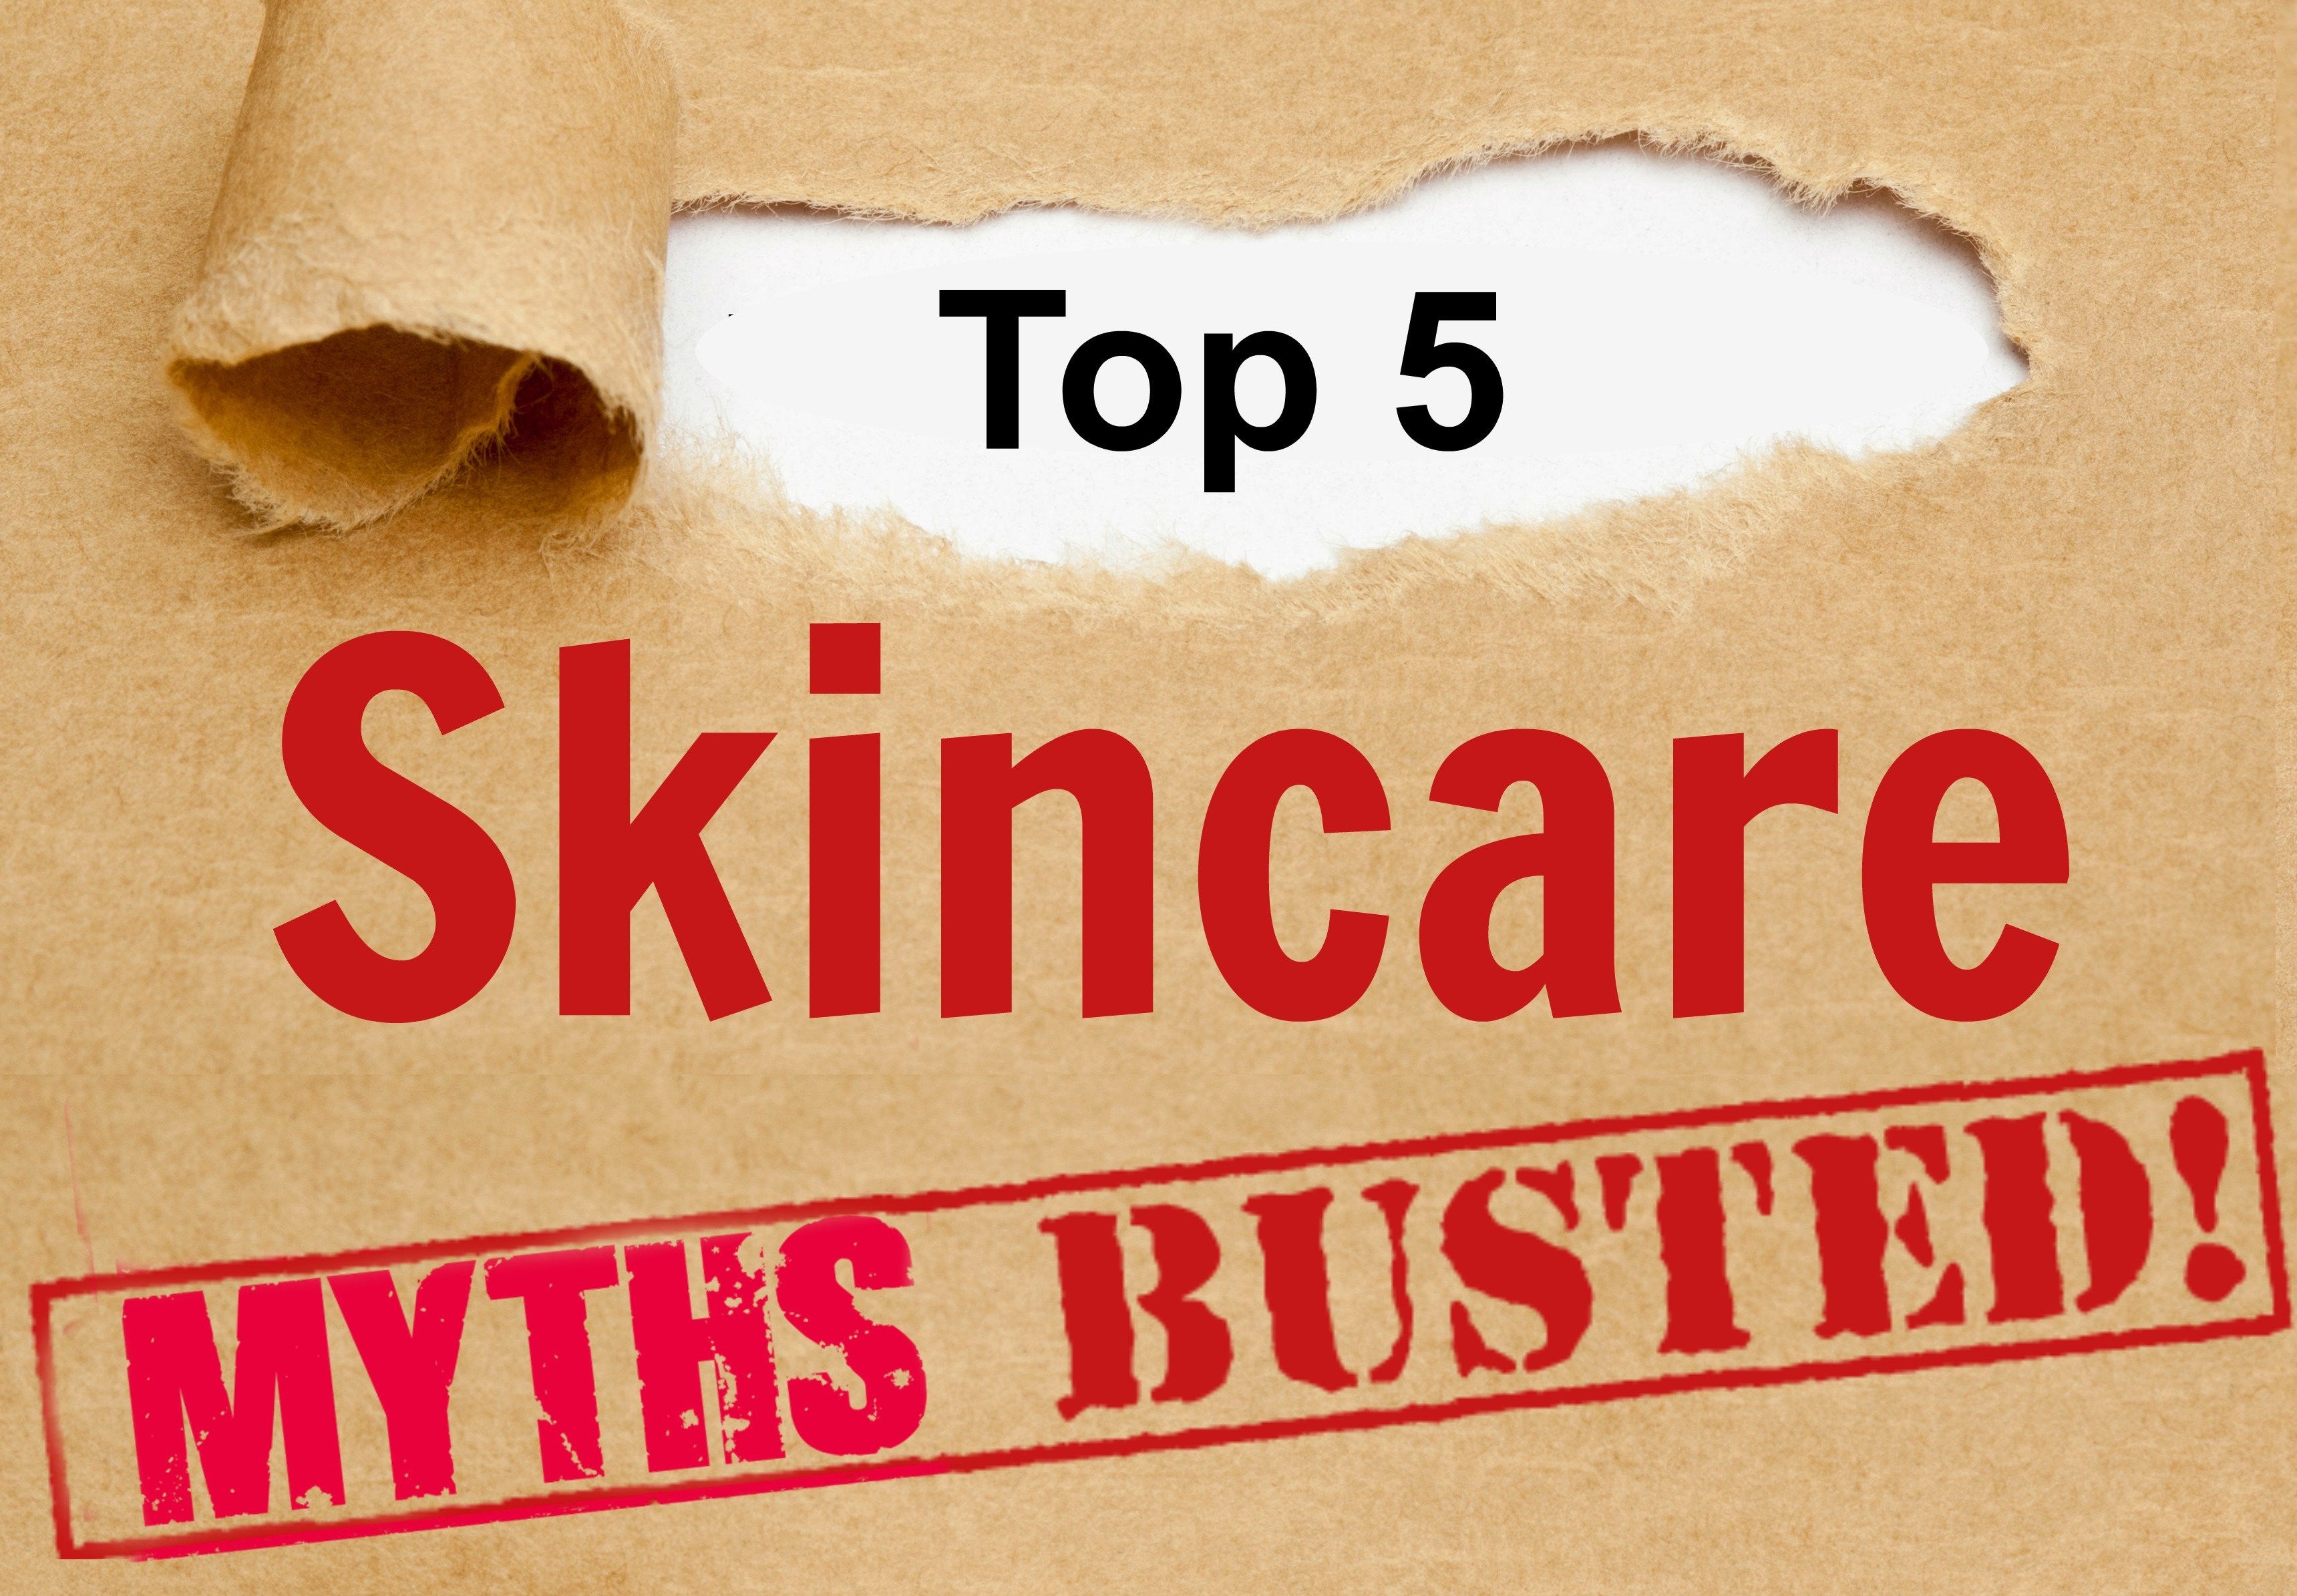 Top 5 Skincare Myths Busted